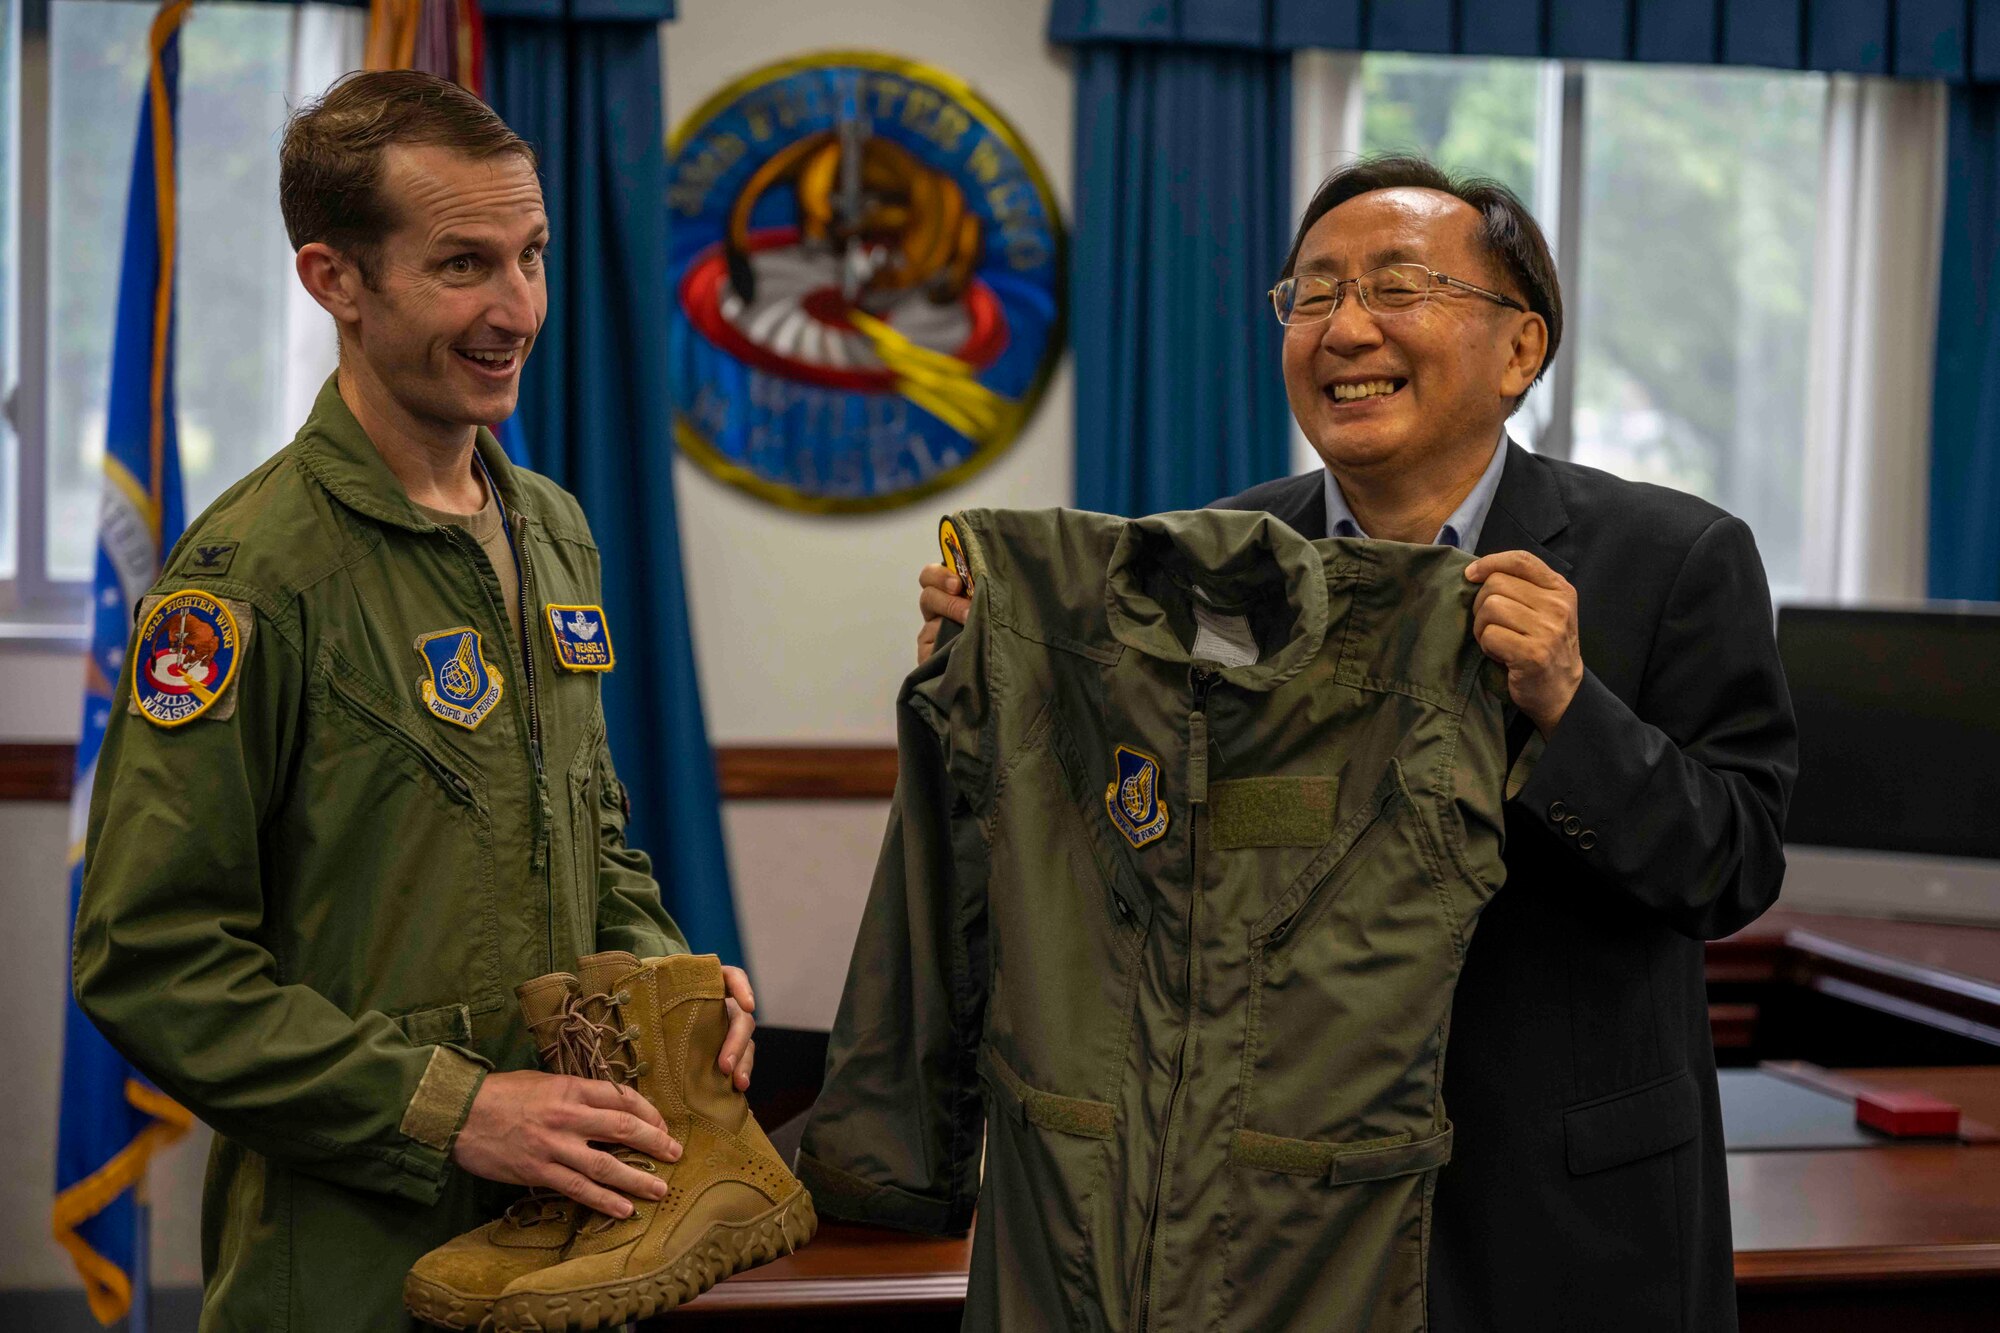 Two people pose with a flight suit while smiling.